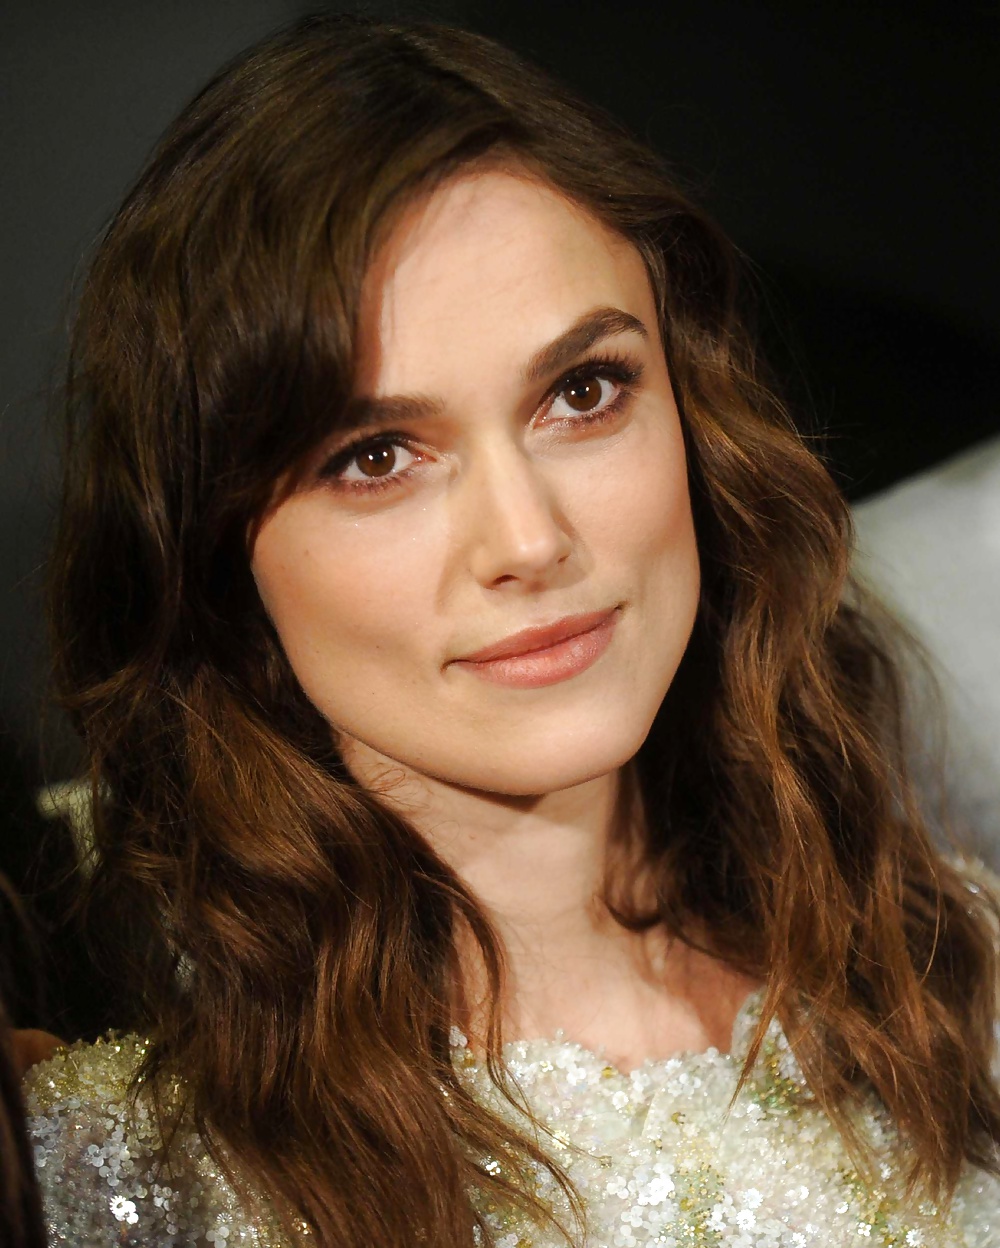 Keira Knightley The Royal Lady of England #35649558